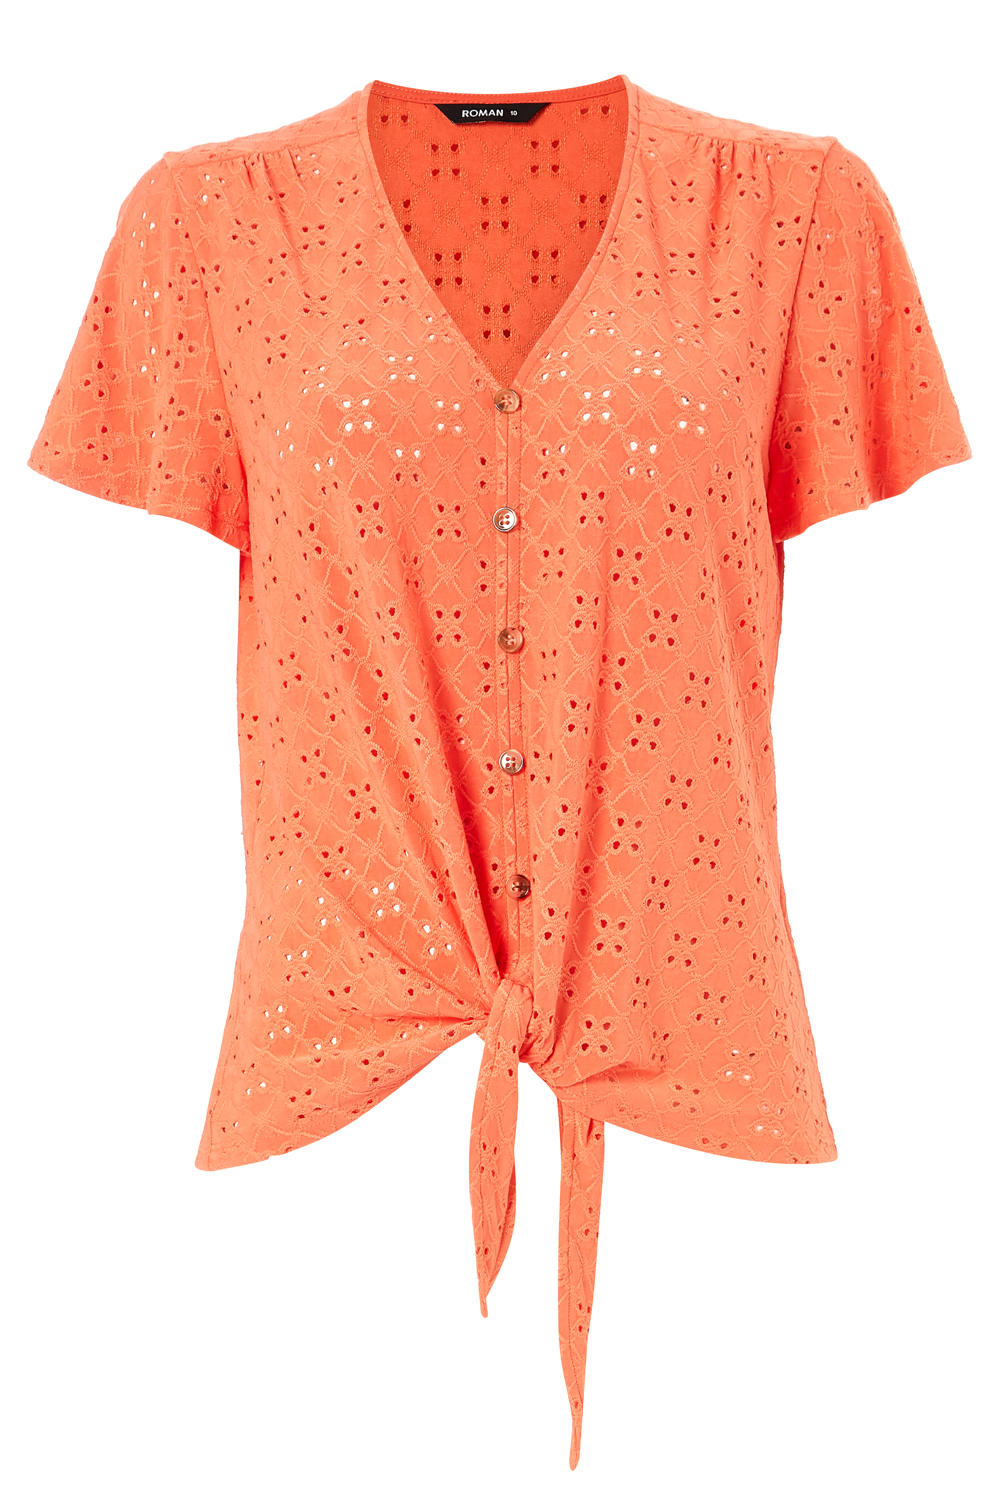 CORAL Broderie Stretch Jersey Tie Front Top, Image 4 of 4